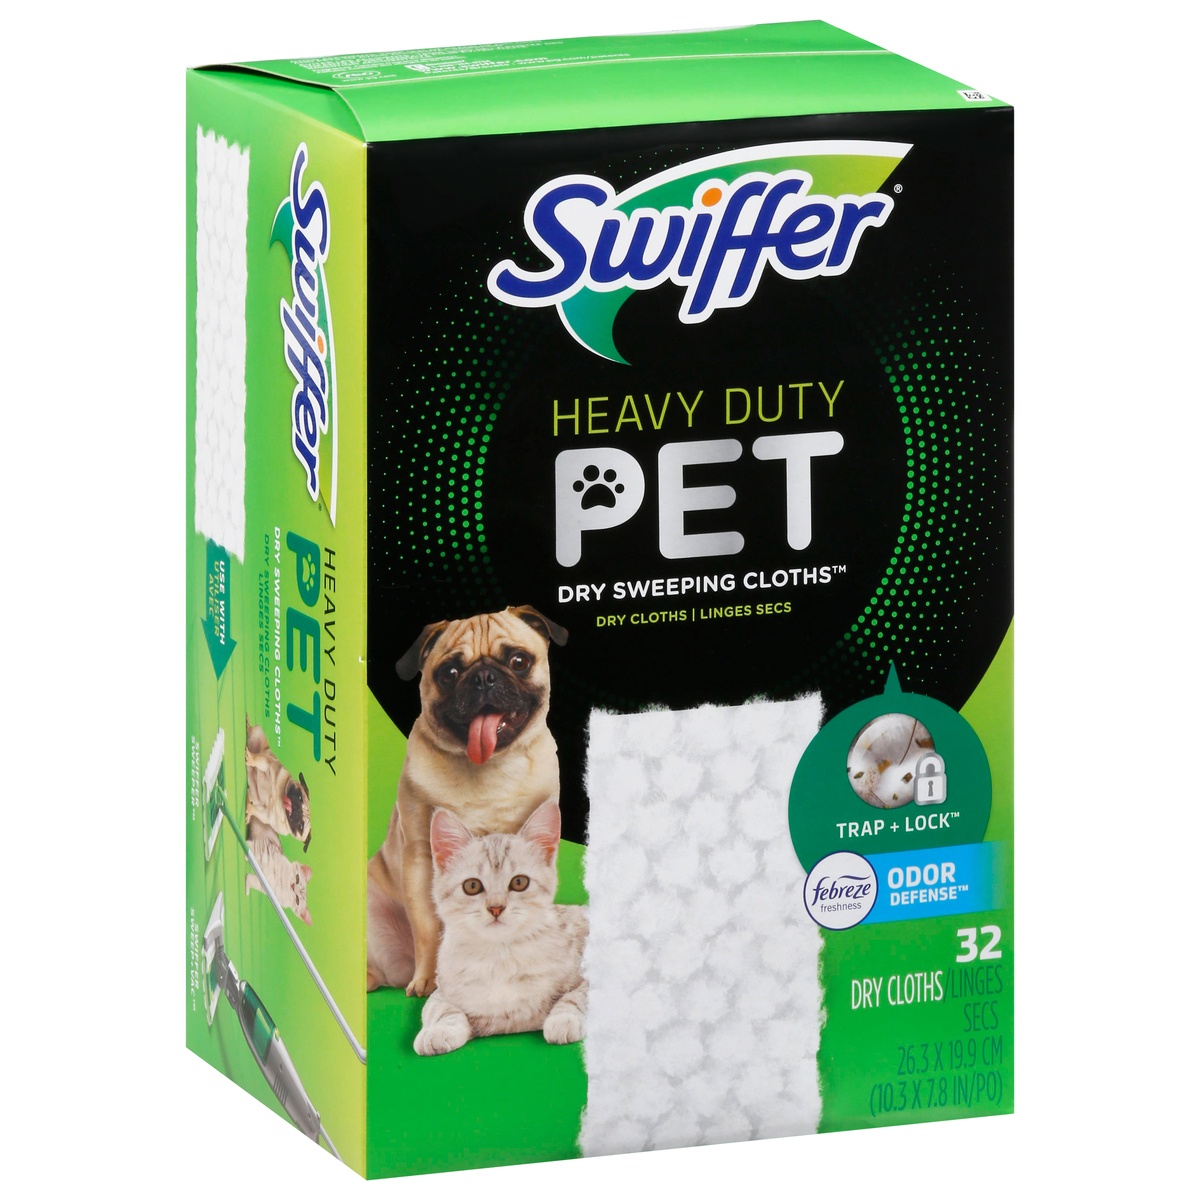 slide 9 of 9, Swiffer Sweeper Pet Heavy Duty Multi-Surface Dry Cloth Refills for Floor Sweeping and Cleaning, 32 count, 32 ct